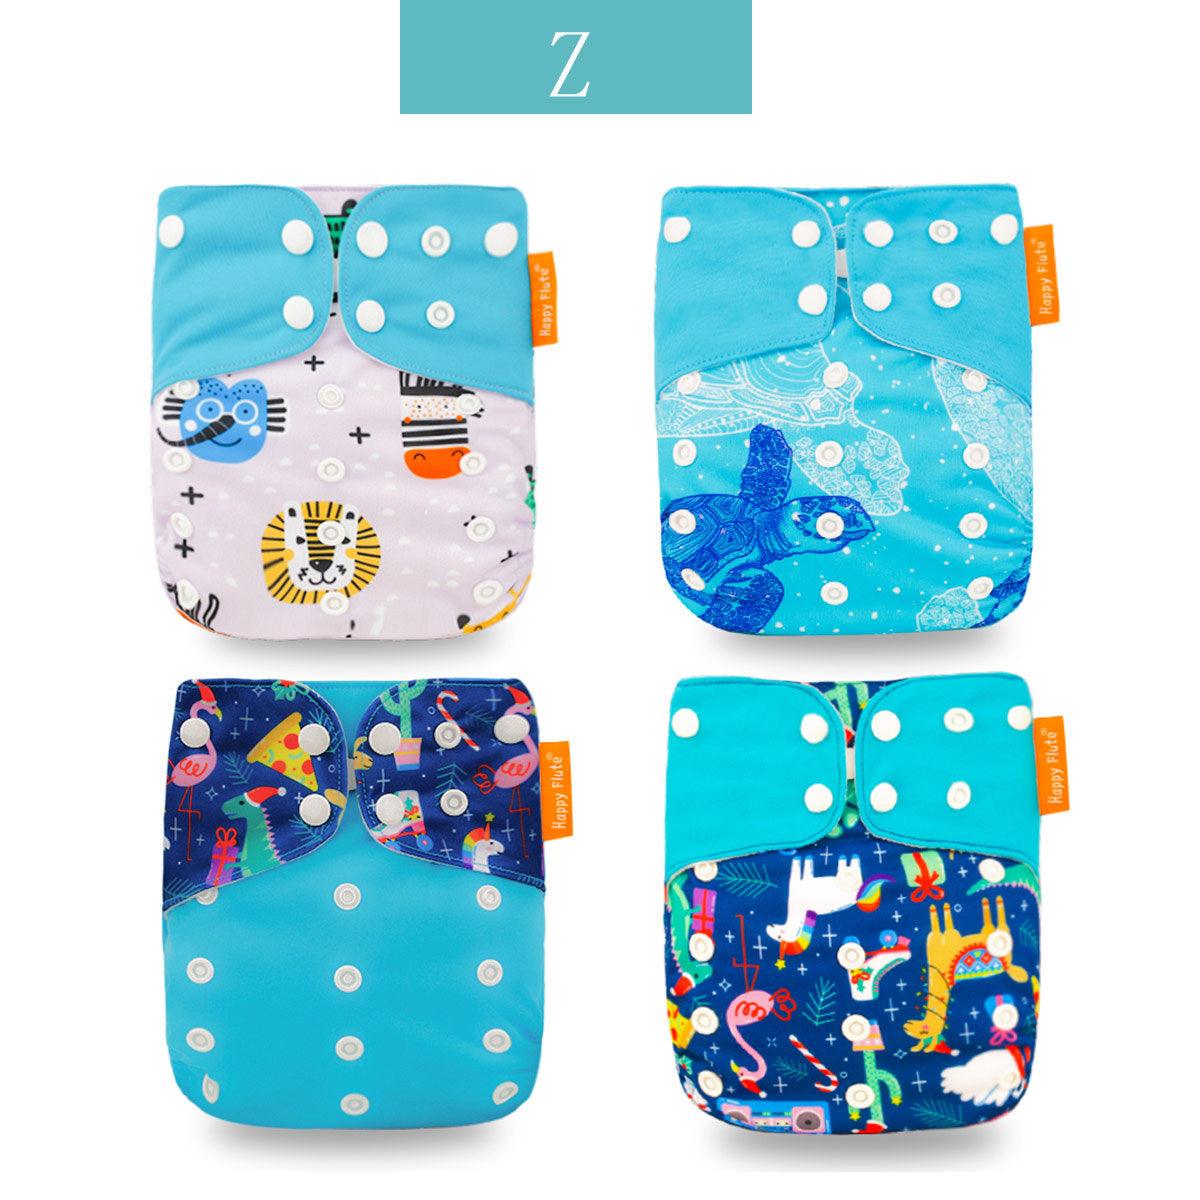 Washable Cloth Diapers Baby Training Pants Baby product